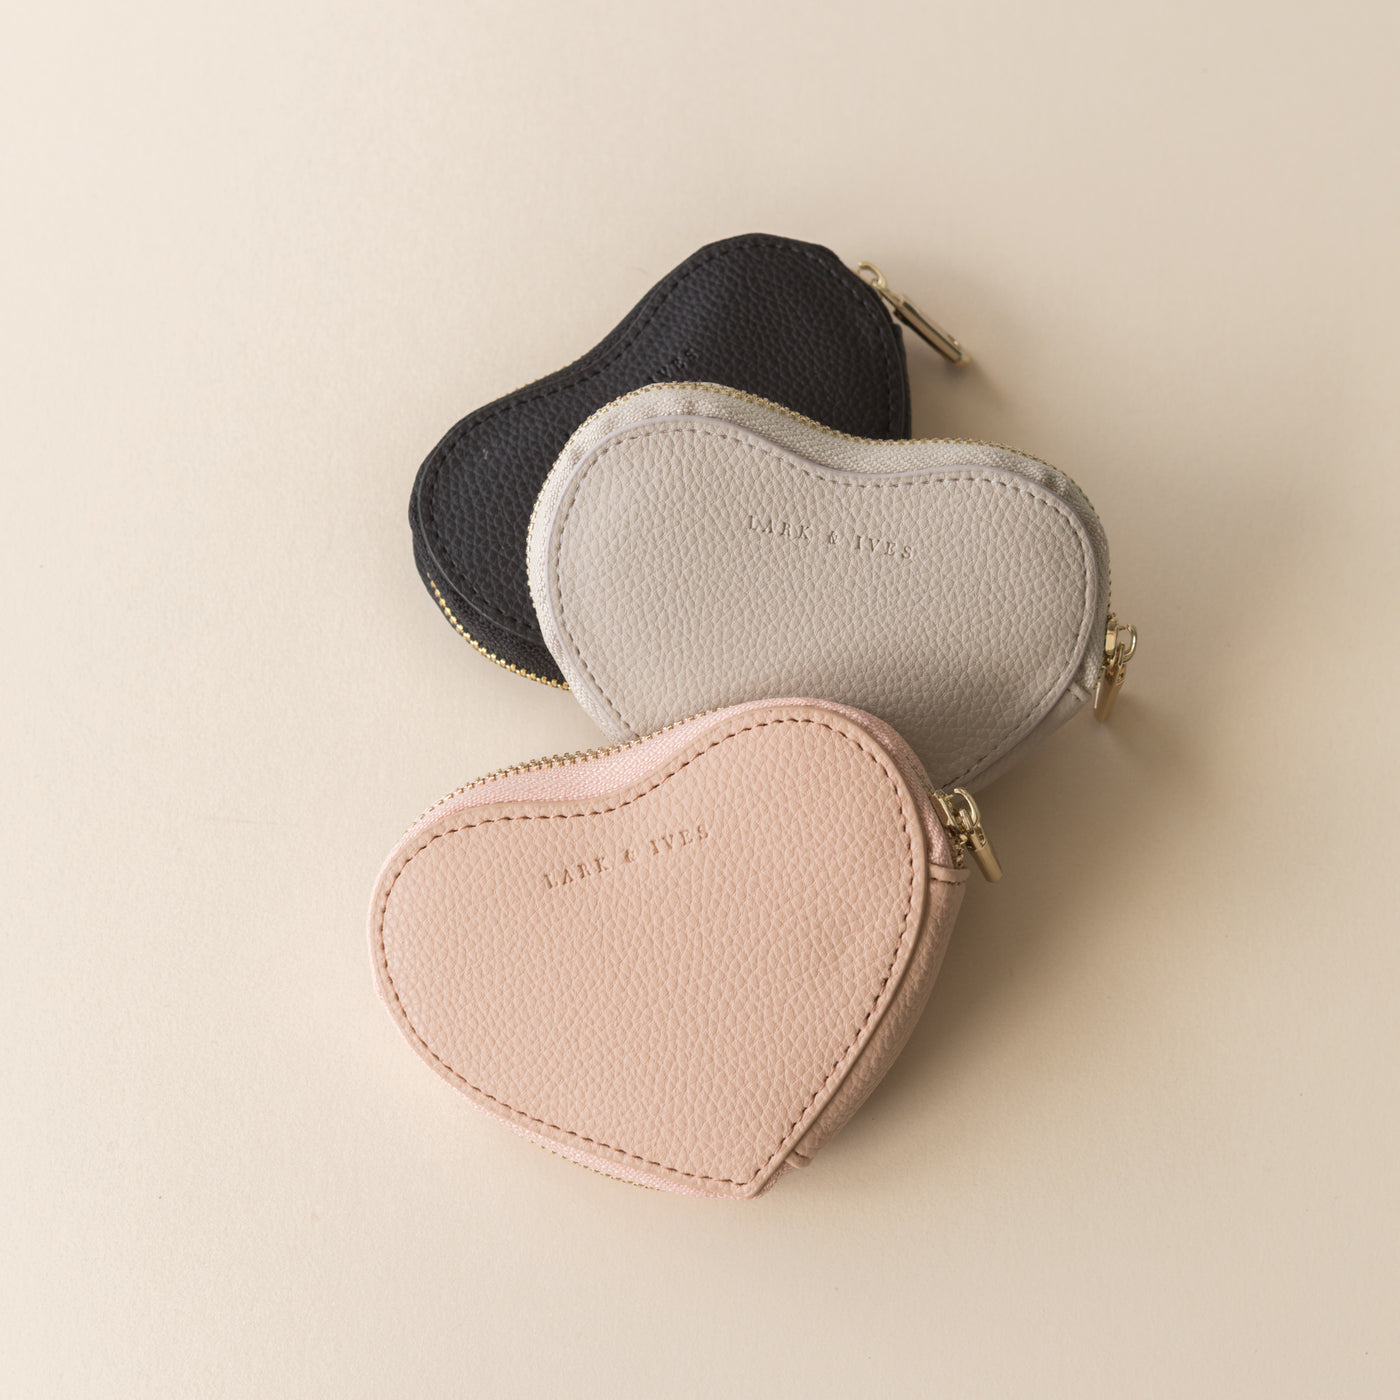 Lark and Ives / Vegan Leather Accessories / Small Accessories / Coin Purse / Heart shaped / Coin Pouch / Mini Wallet / Set of three